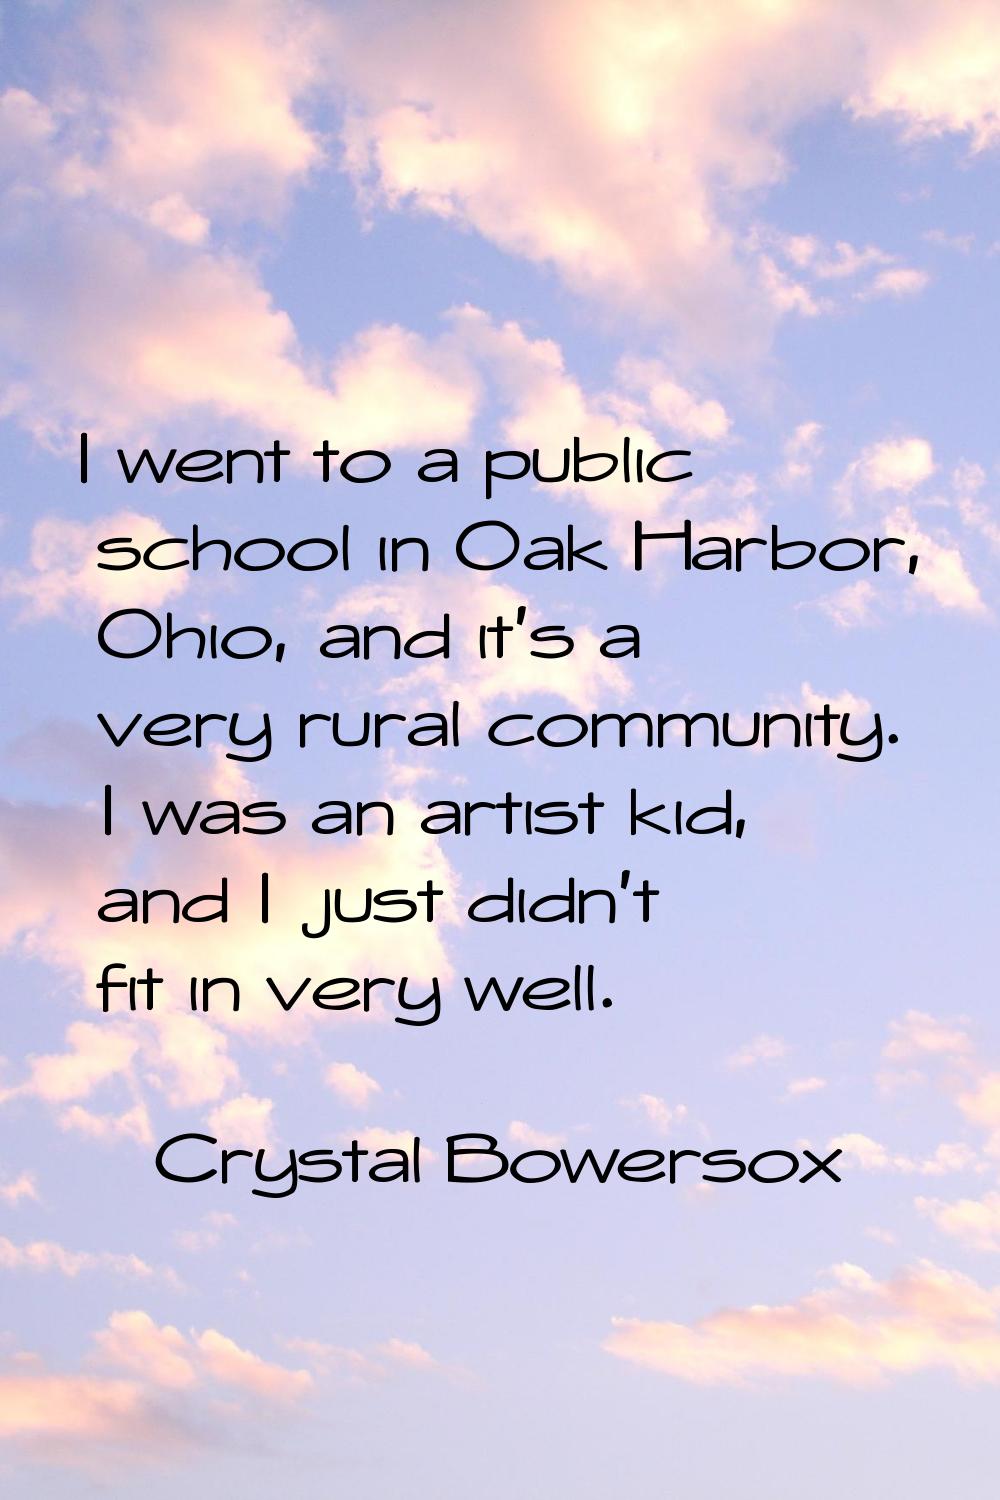 I went to a public school in Oak Harbor, Ohio, and it's a very rural community. I was an artist kid